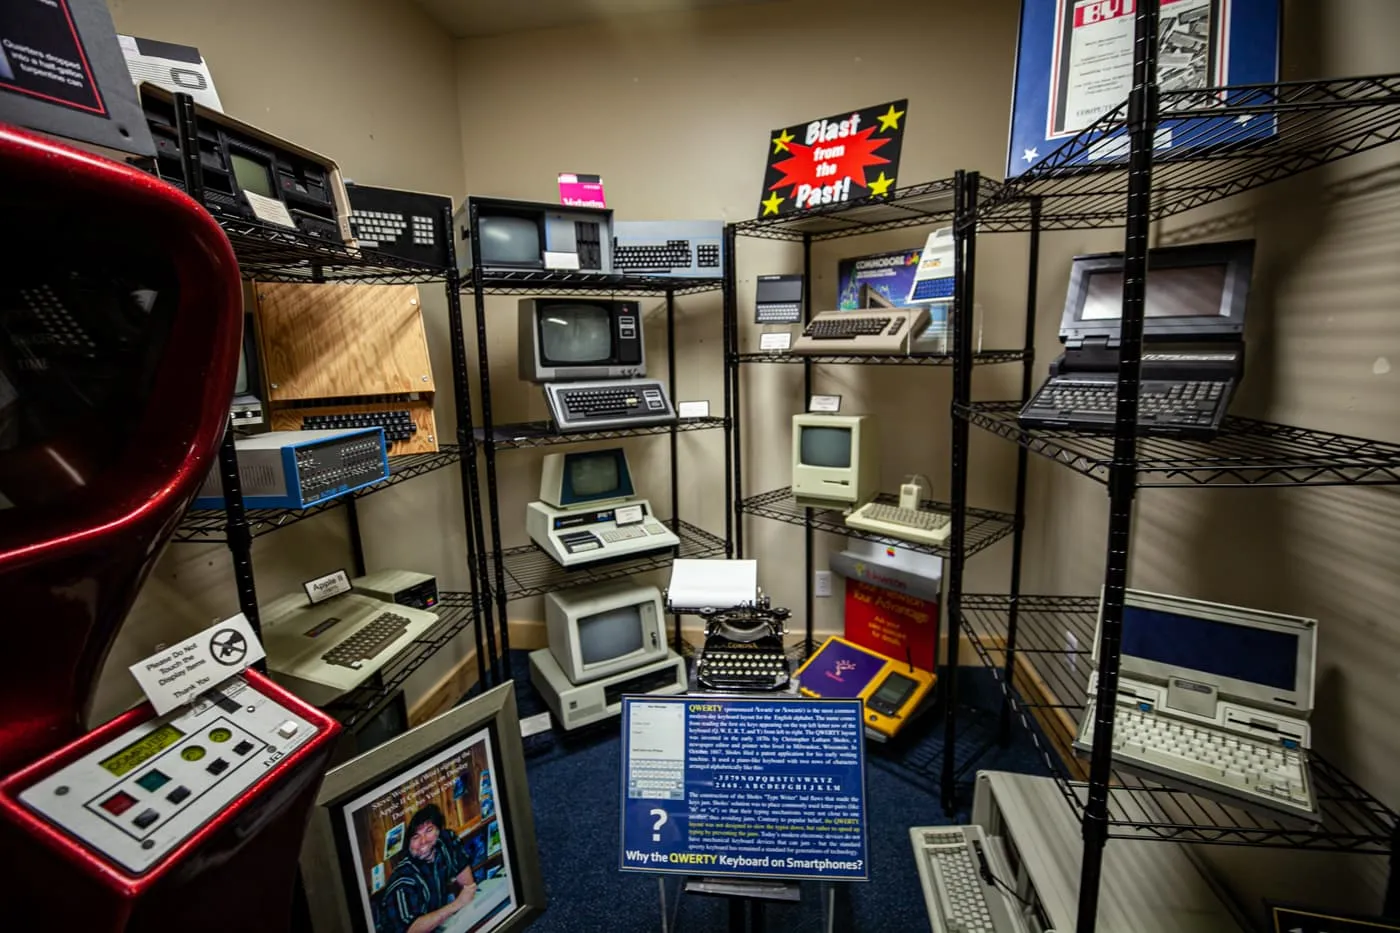 Blast from the past: computers through the years - American Computer & Robotics Museum in Bozeman, Montana